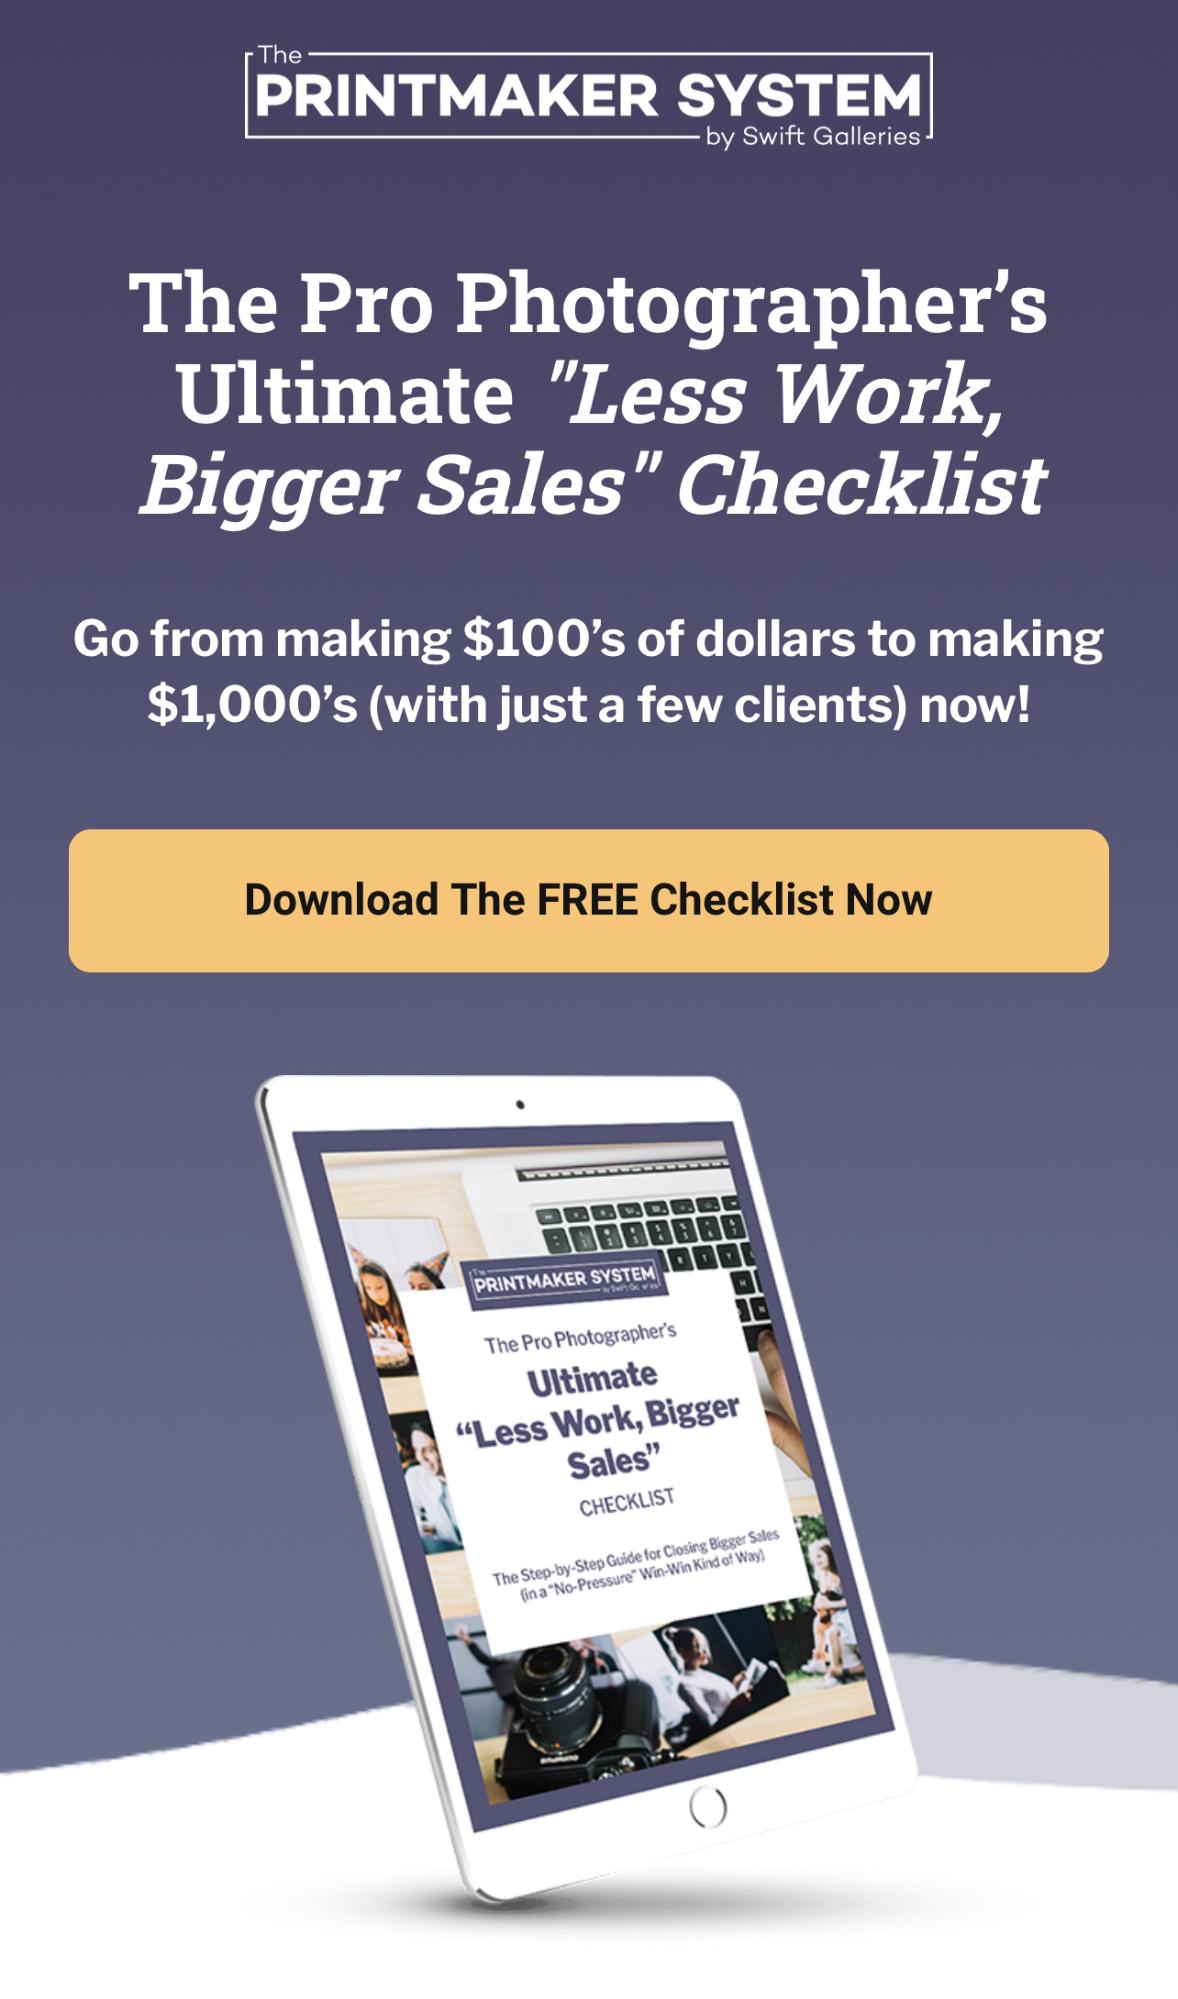 Example from Swift Galleries of downloadable content used as a lead magnet to grow an email list